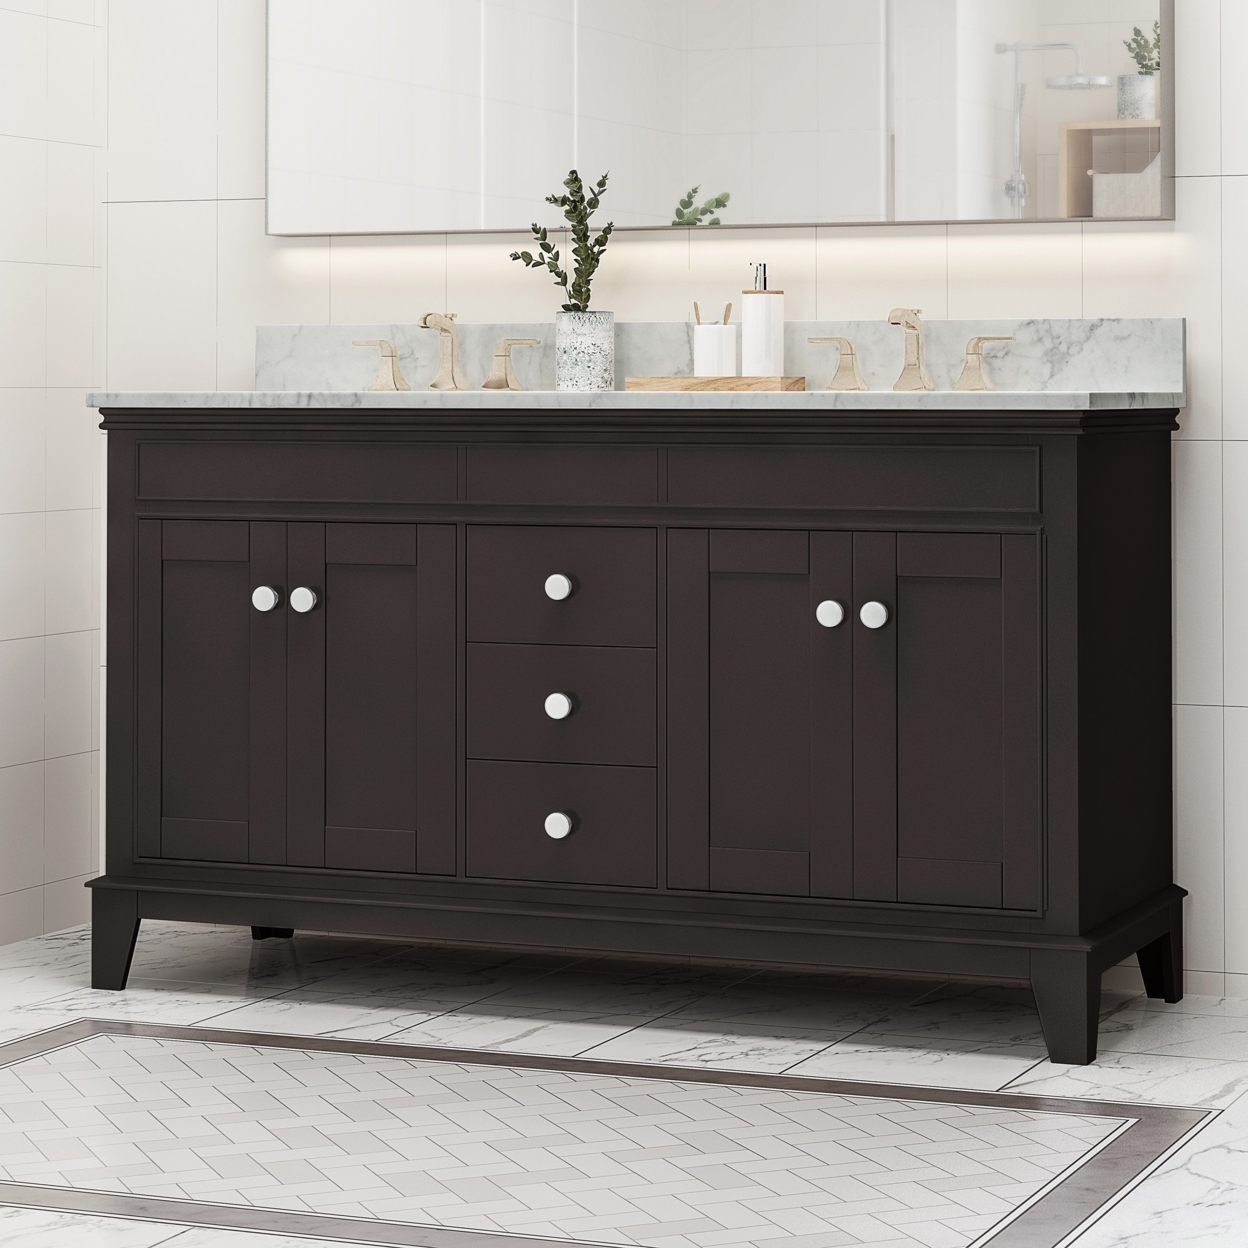 Feldspar Contemporary 60 Wood Double Sink Bathroom Vanity With Marble Counter Top With Carrara White Marble - White